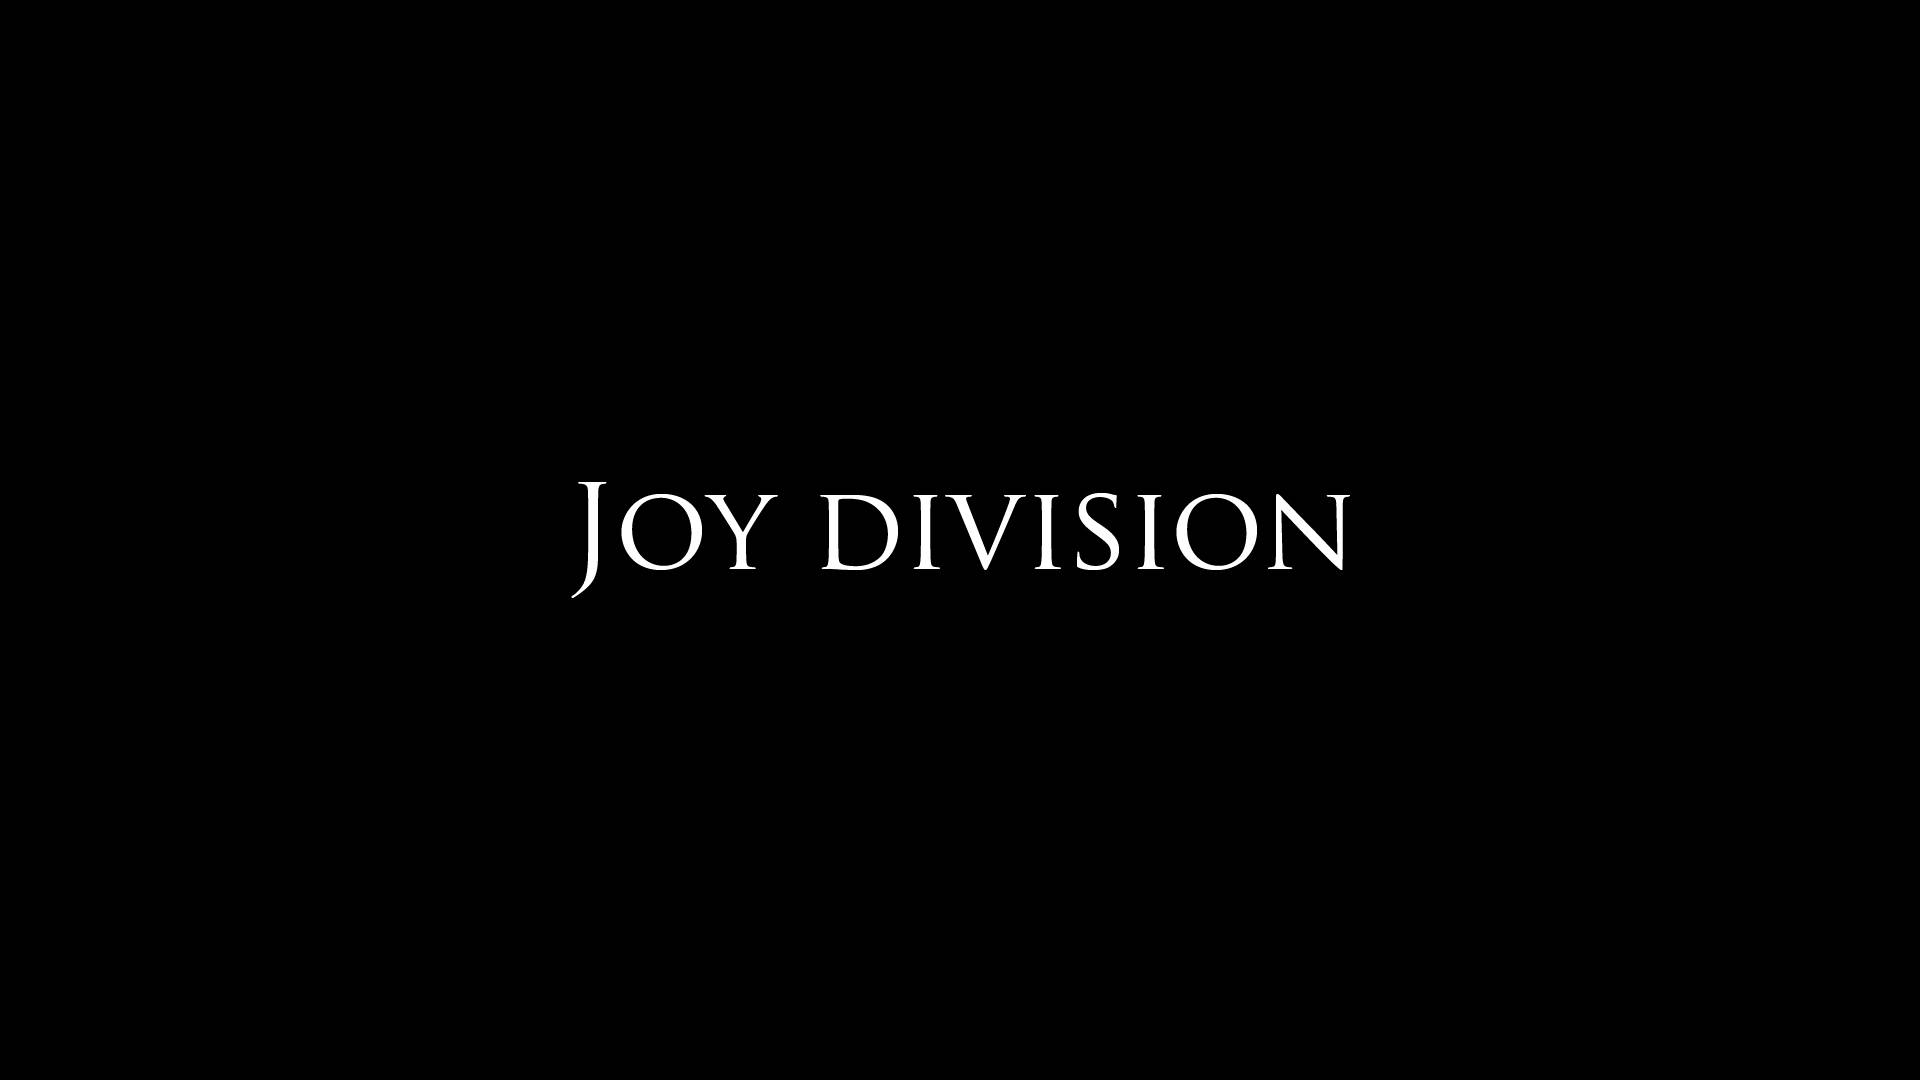 Joy Division Wallpapers 1920x1080